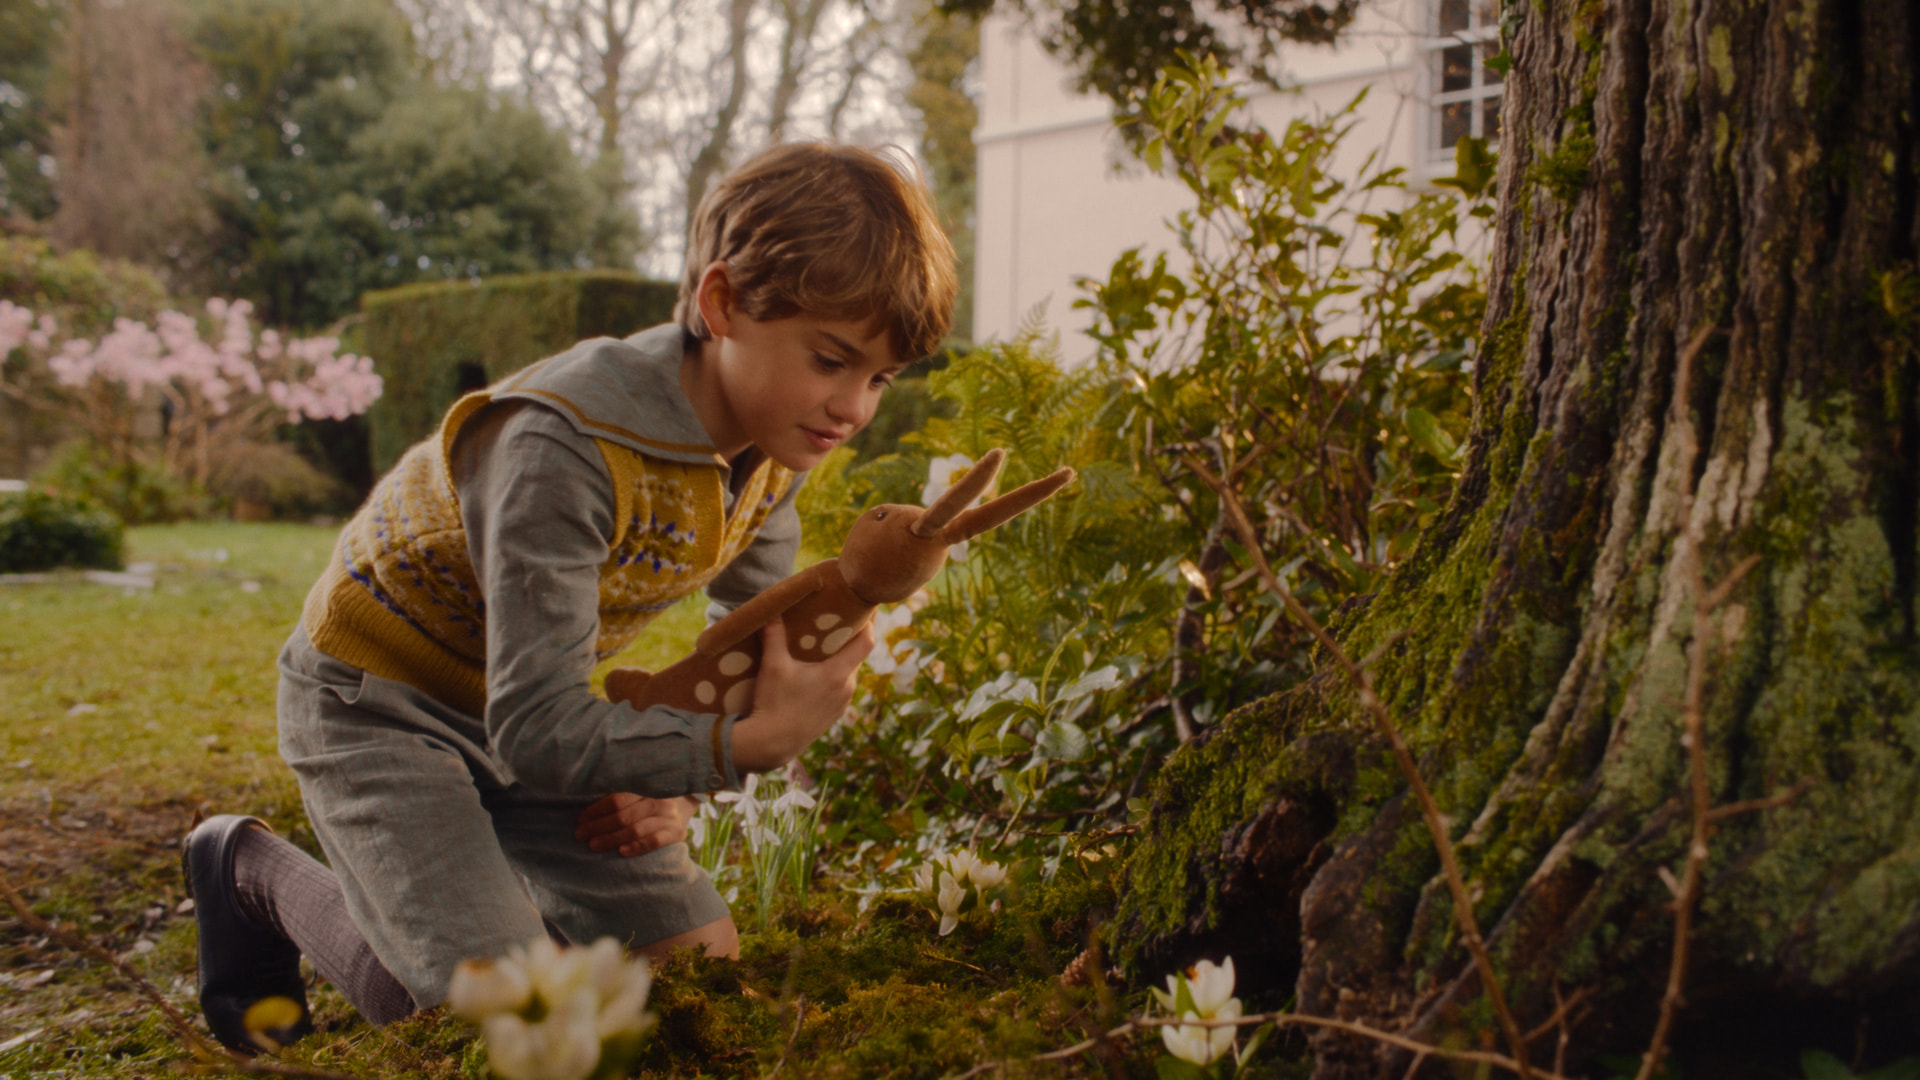 William (voiced by Phoenix Laroche) and Velveteen Rabbit (voiced by Alex Lawther) in "The Velveteen Rabbit," premiering November 22, 2023 on Apple TV+.